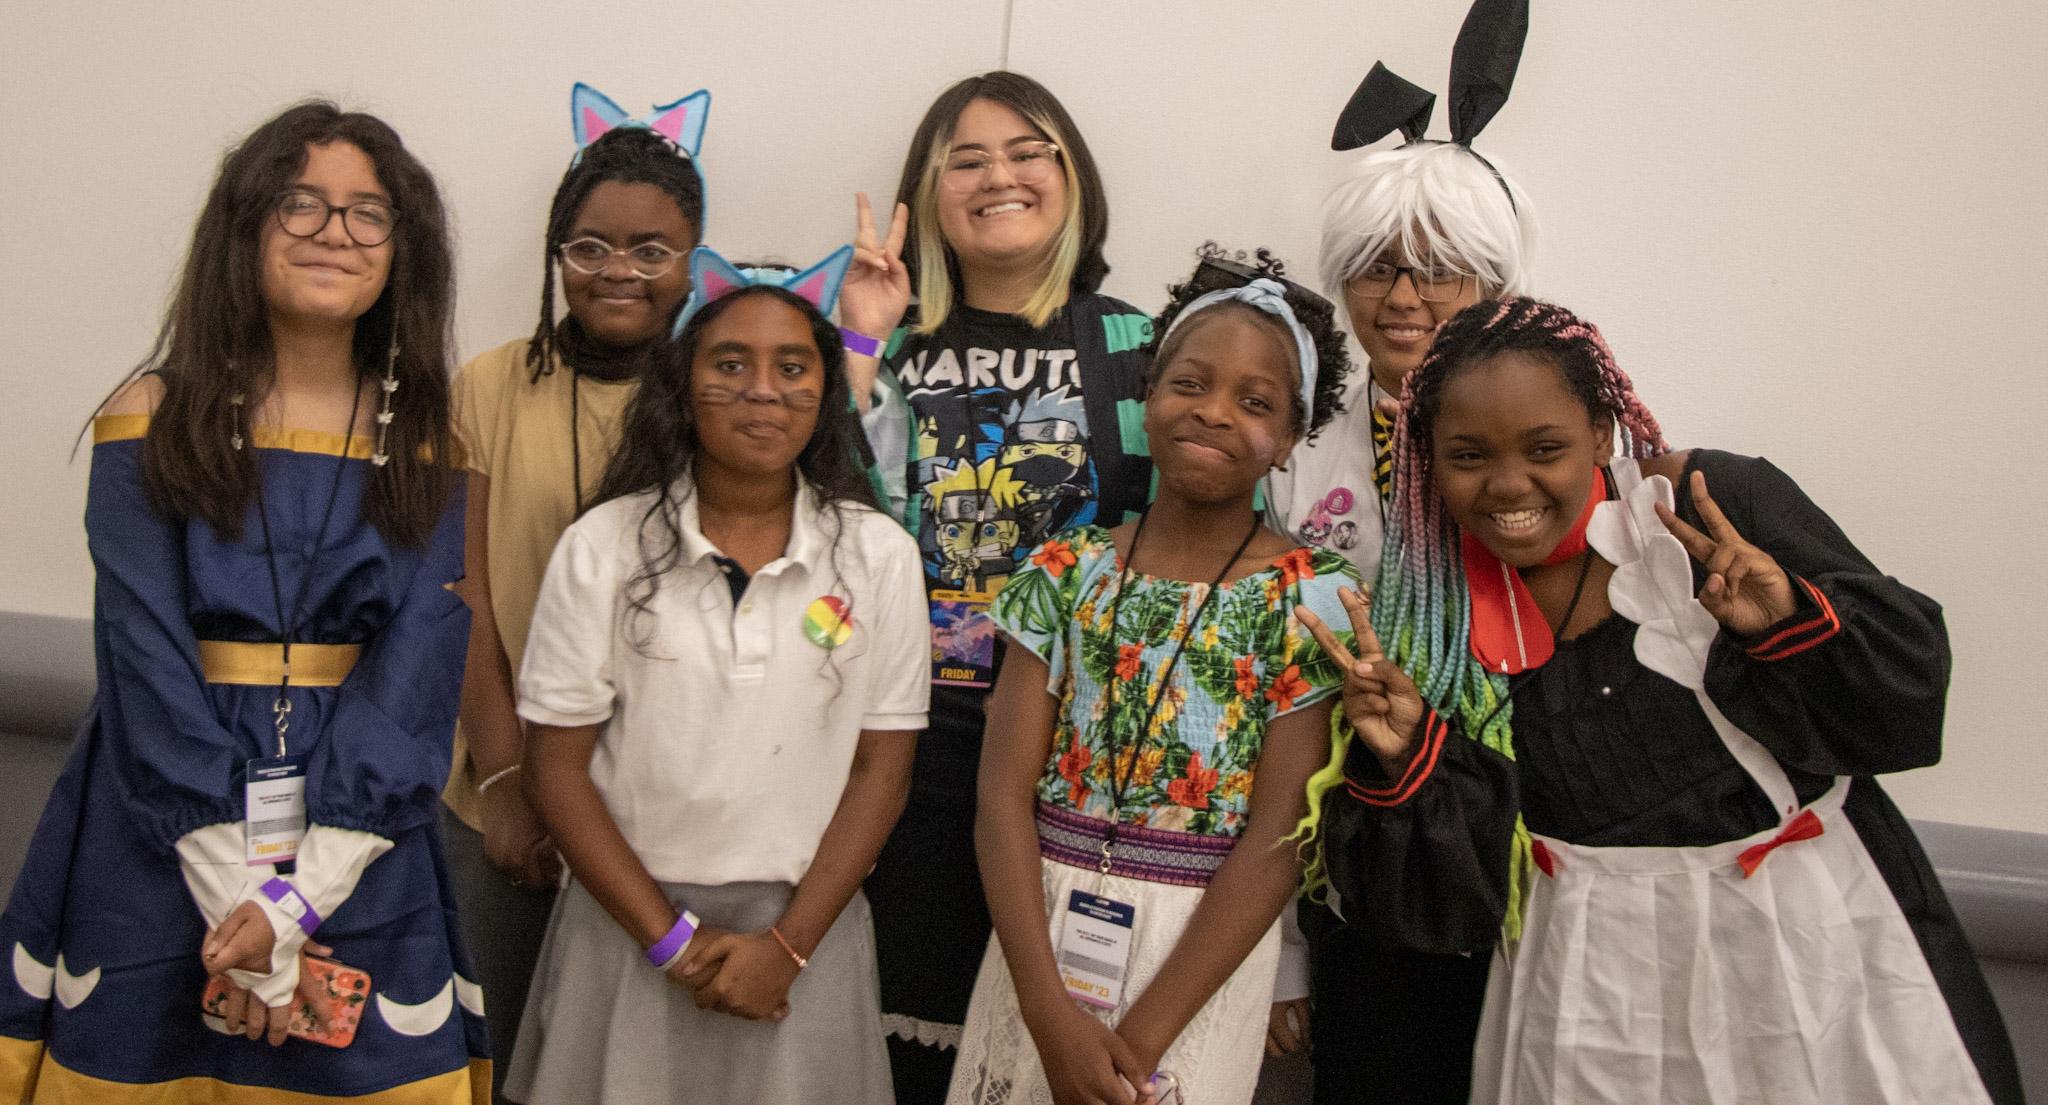 Students in costume and cosplay at a Pop Culture Classroom event